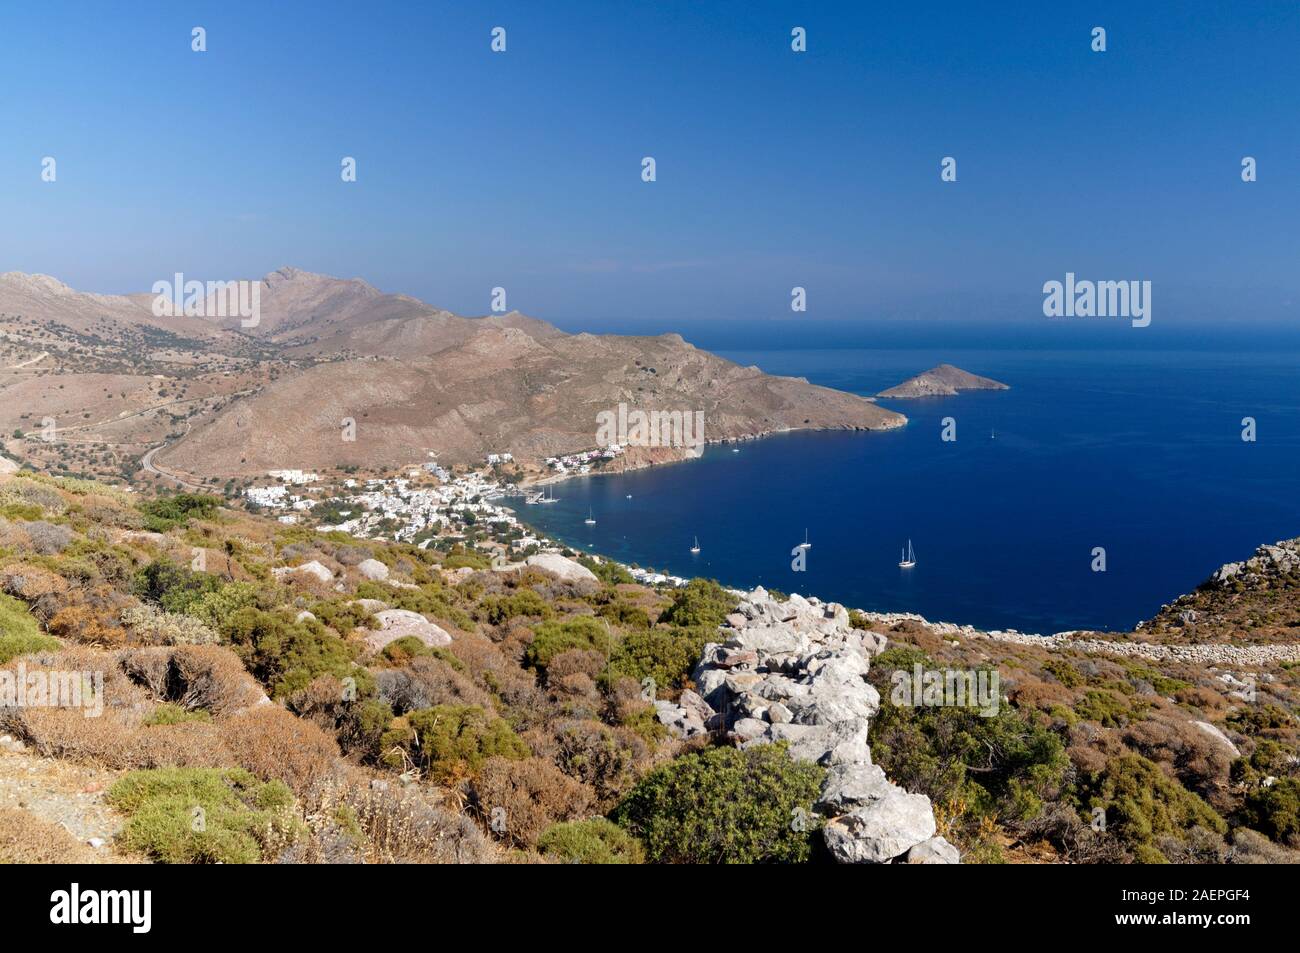 View of Livadia Bay from Vounos, Tilos, Dodecanese islands, Southern Aegean, Greece. Stock Photo